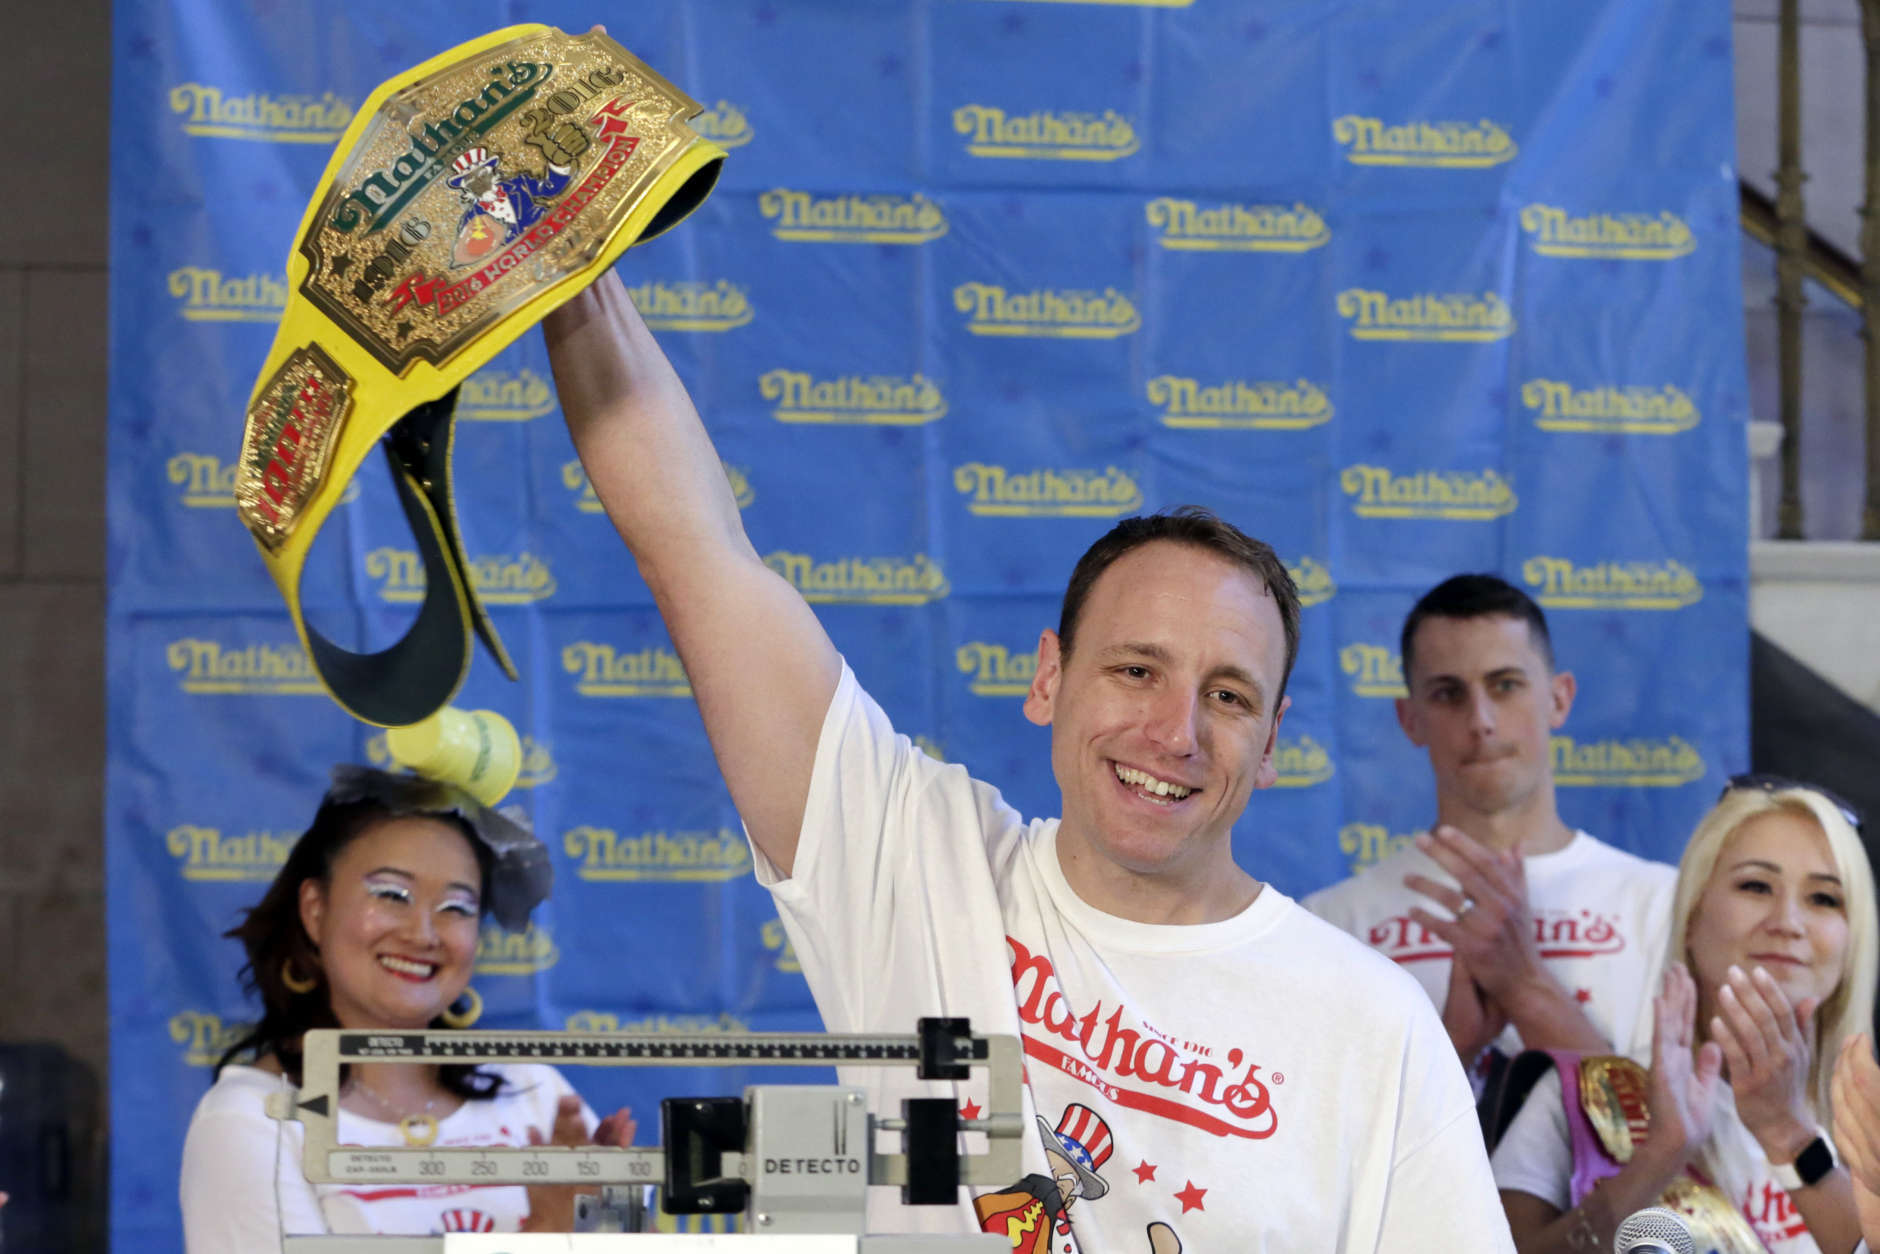 Eight-time men's champion Joey Chestnut, of San Jose, Calif., holds holds his championship belt during the weigh-in for the 2017 Nathan's Hot Dog Eating Contest, in Brooklyn Borough Hall, in New York, Monday, July 3, 2017. Chestnut weighed-in at 221.5 pounds. The current women's champ, Miki Sudo, of Las Vegas, is at right. (AP Photo/Richard Drew)